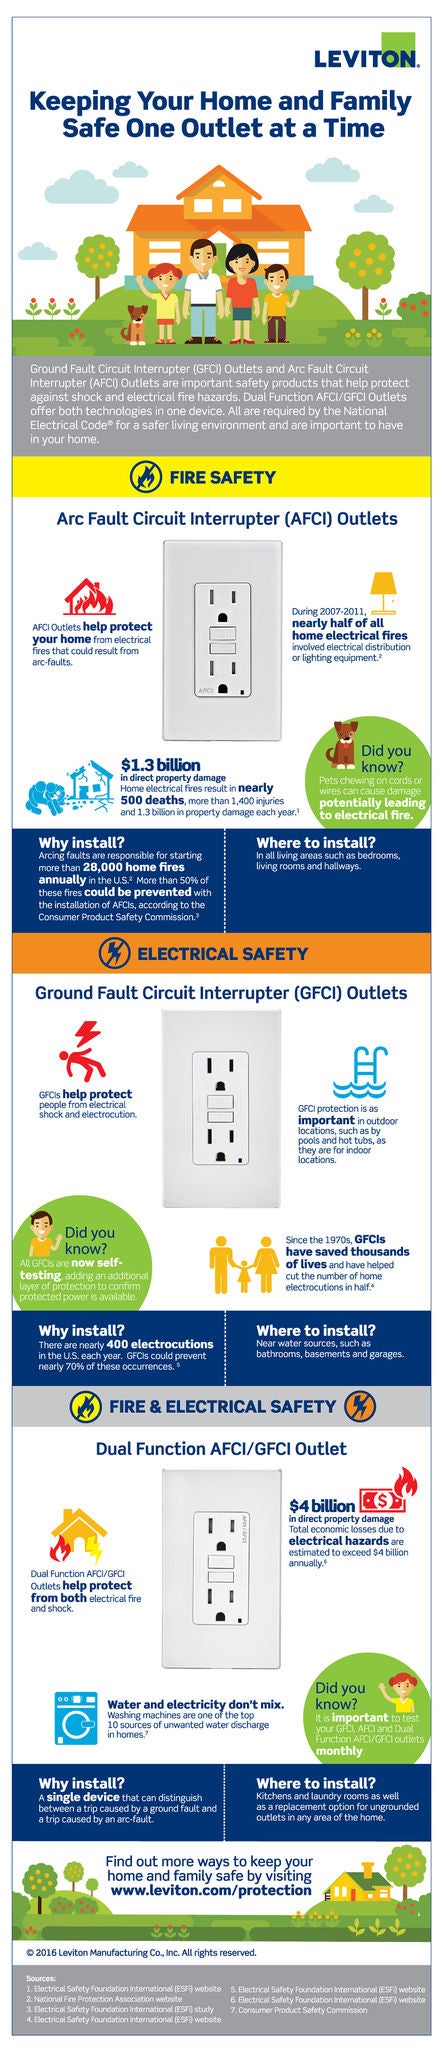 keeping your home safe one outlet at a time.